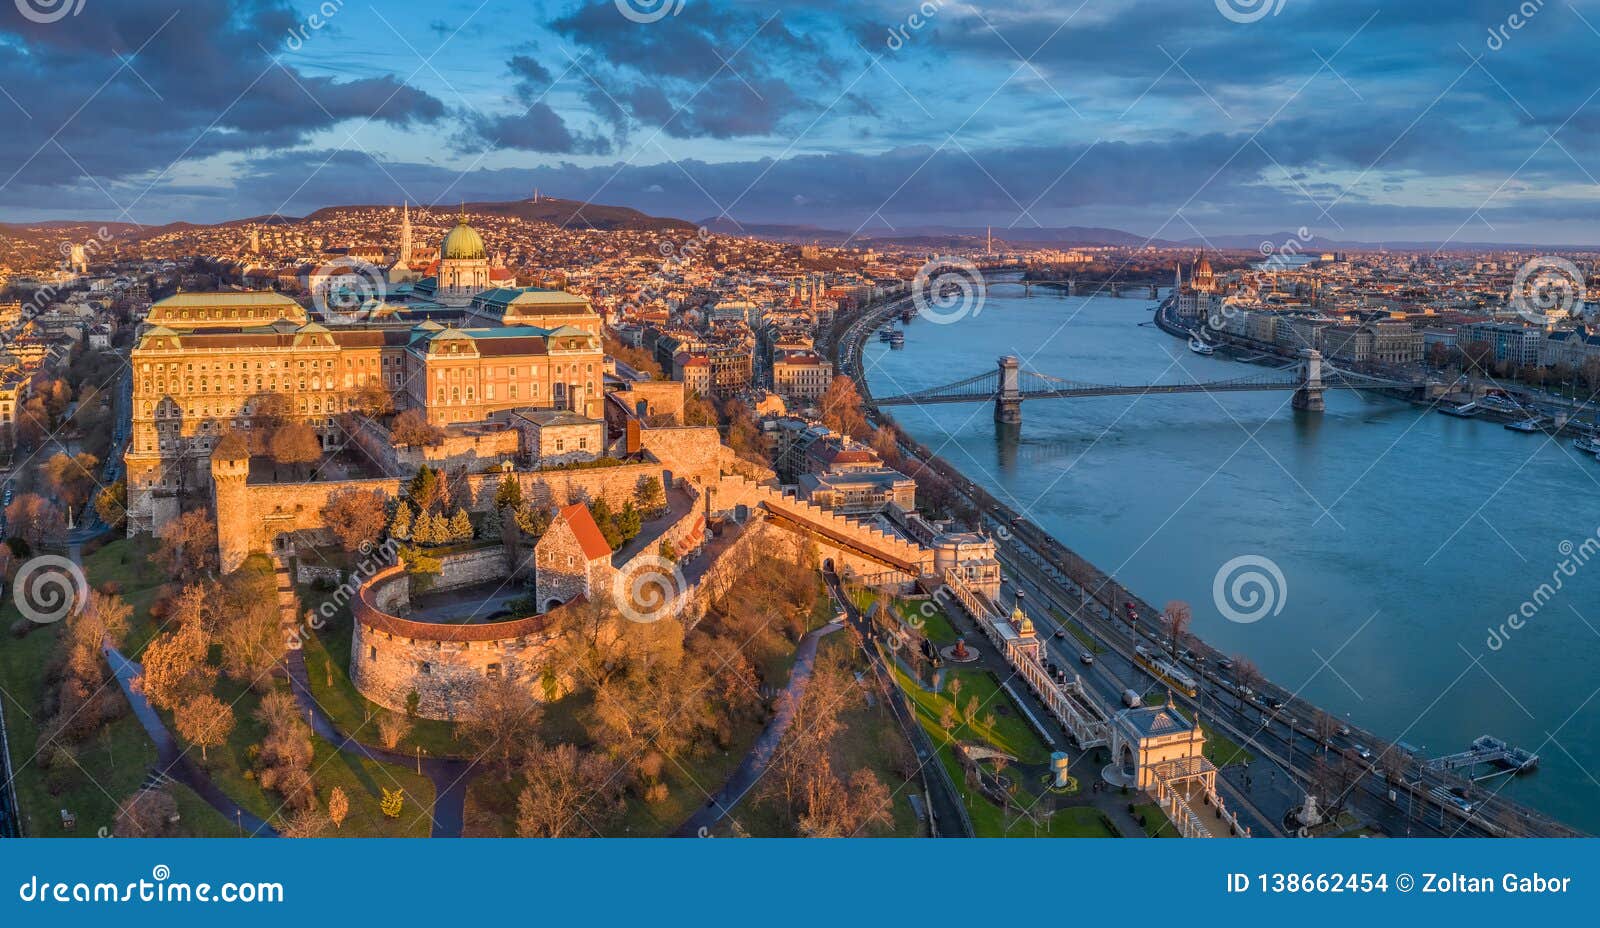 budapest, hungary - aerial panoramic view of buda castle royal palace with szechenyi chain bridge, parliament